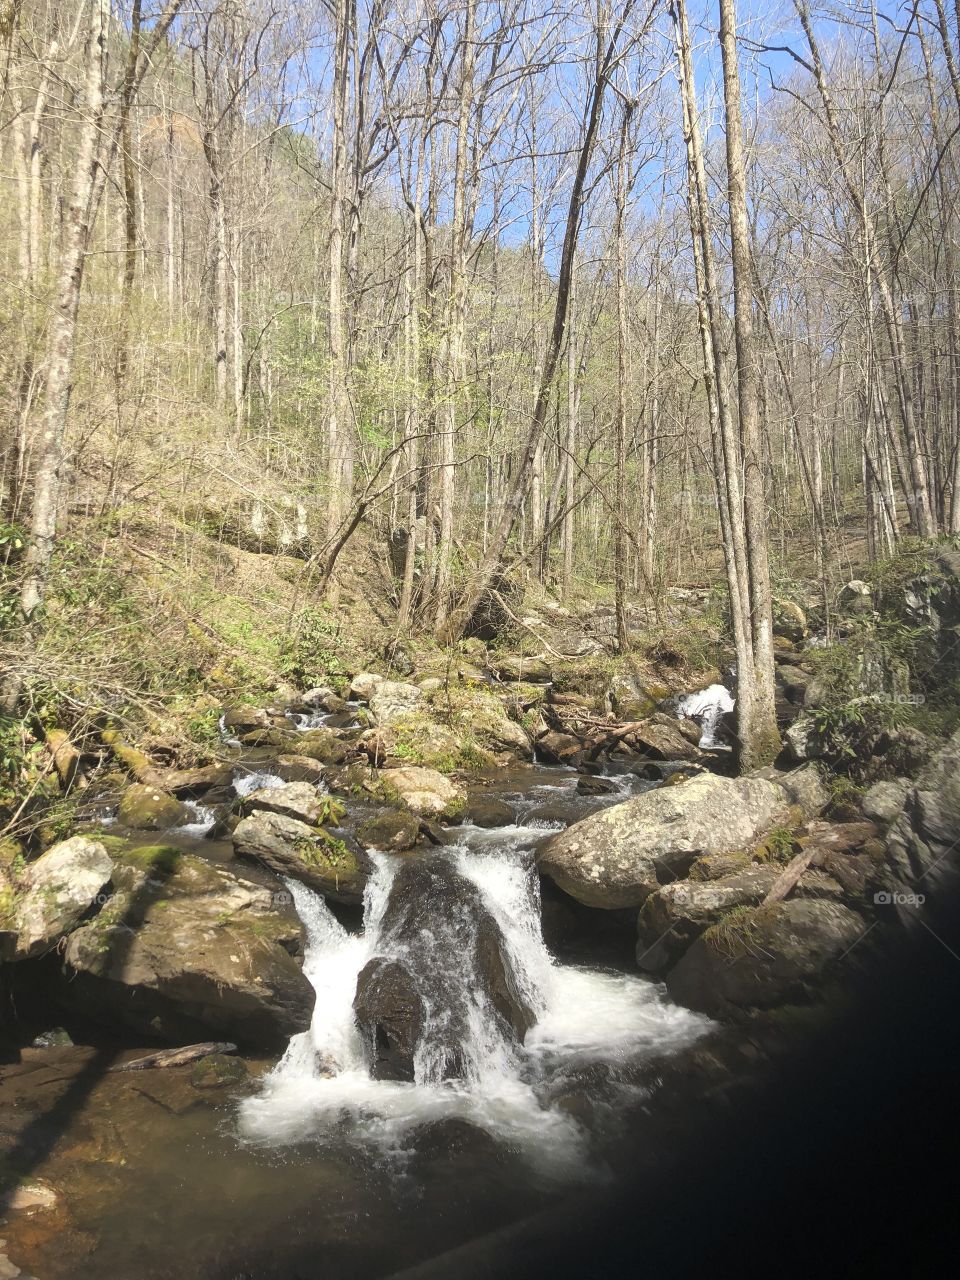 Early spring landscape in the North Georgia Mountains